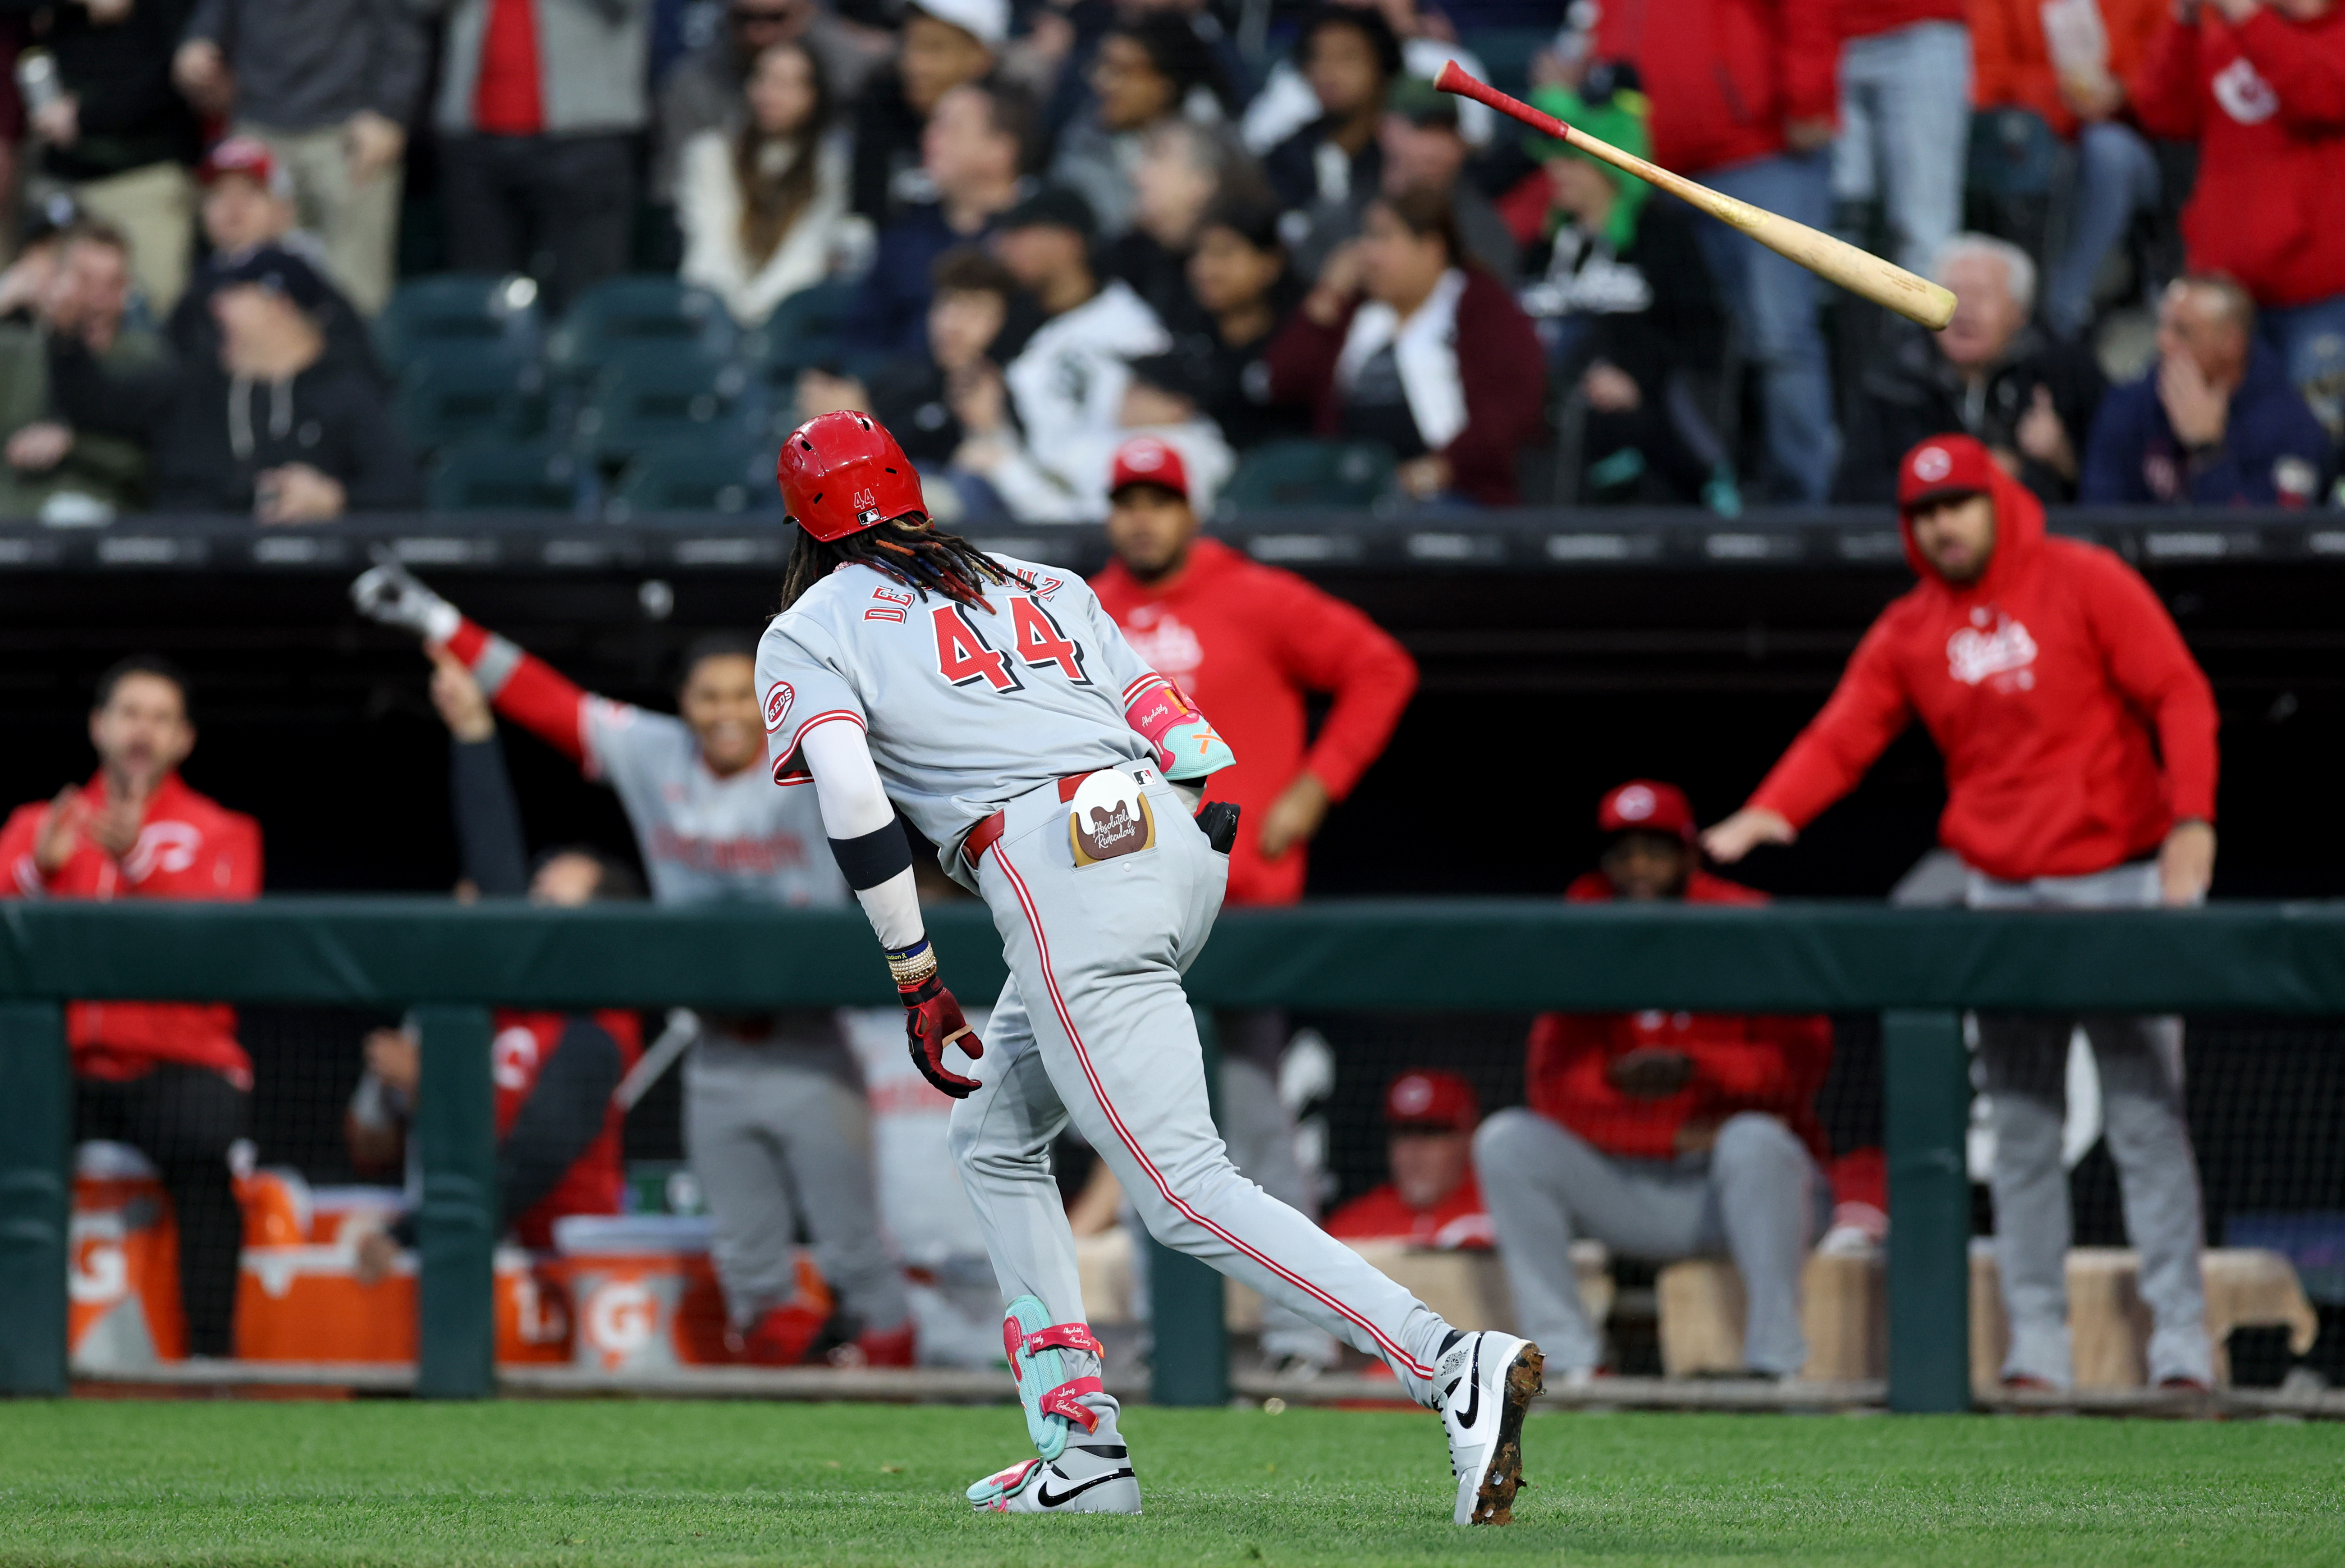 Reds shortstop Elly De La Cruz tosses his bat after hitting a three-run home run in the third inning against the White Sox on April 12, 2024, at Guaranteed Rate Field. (Chris Sweda/Chicago Tribune)